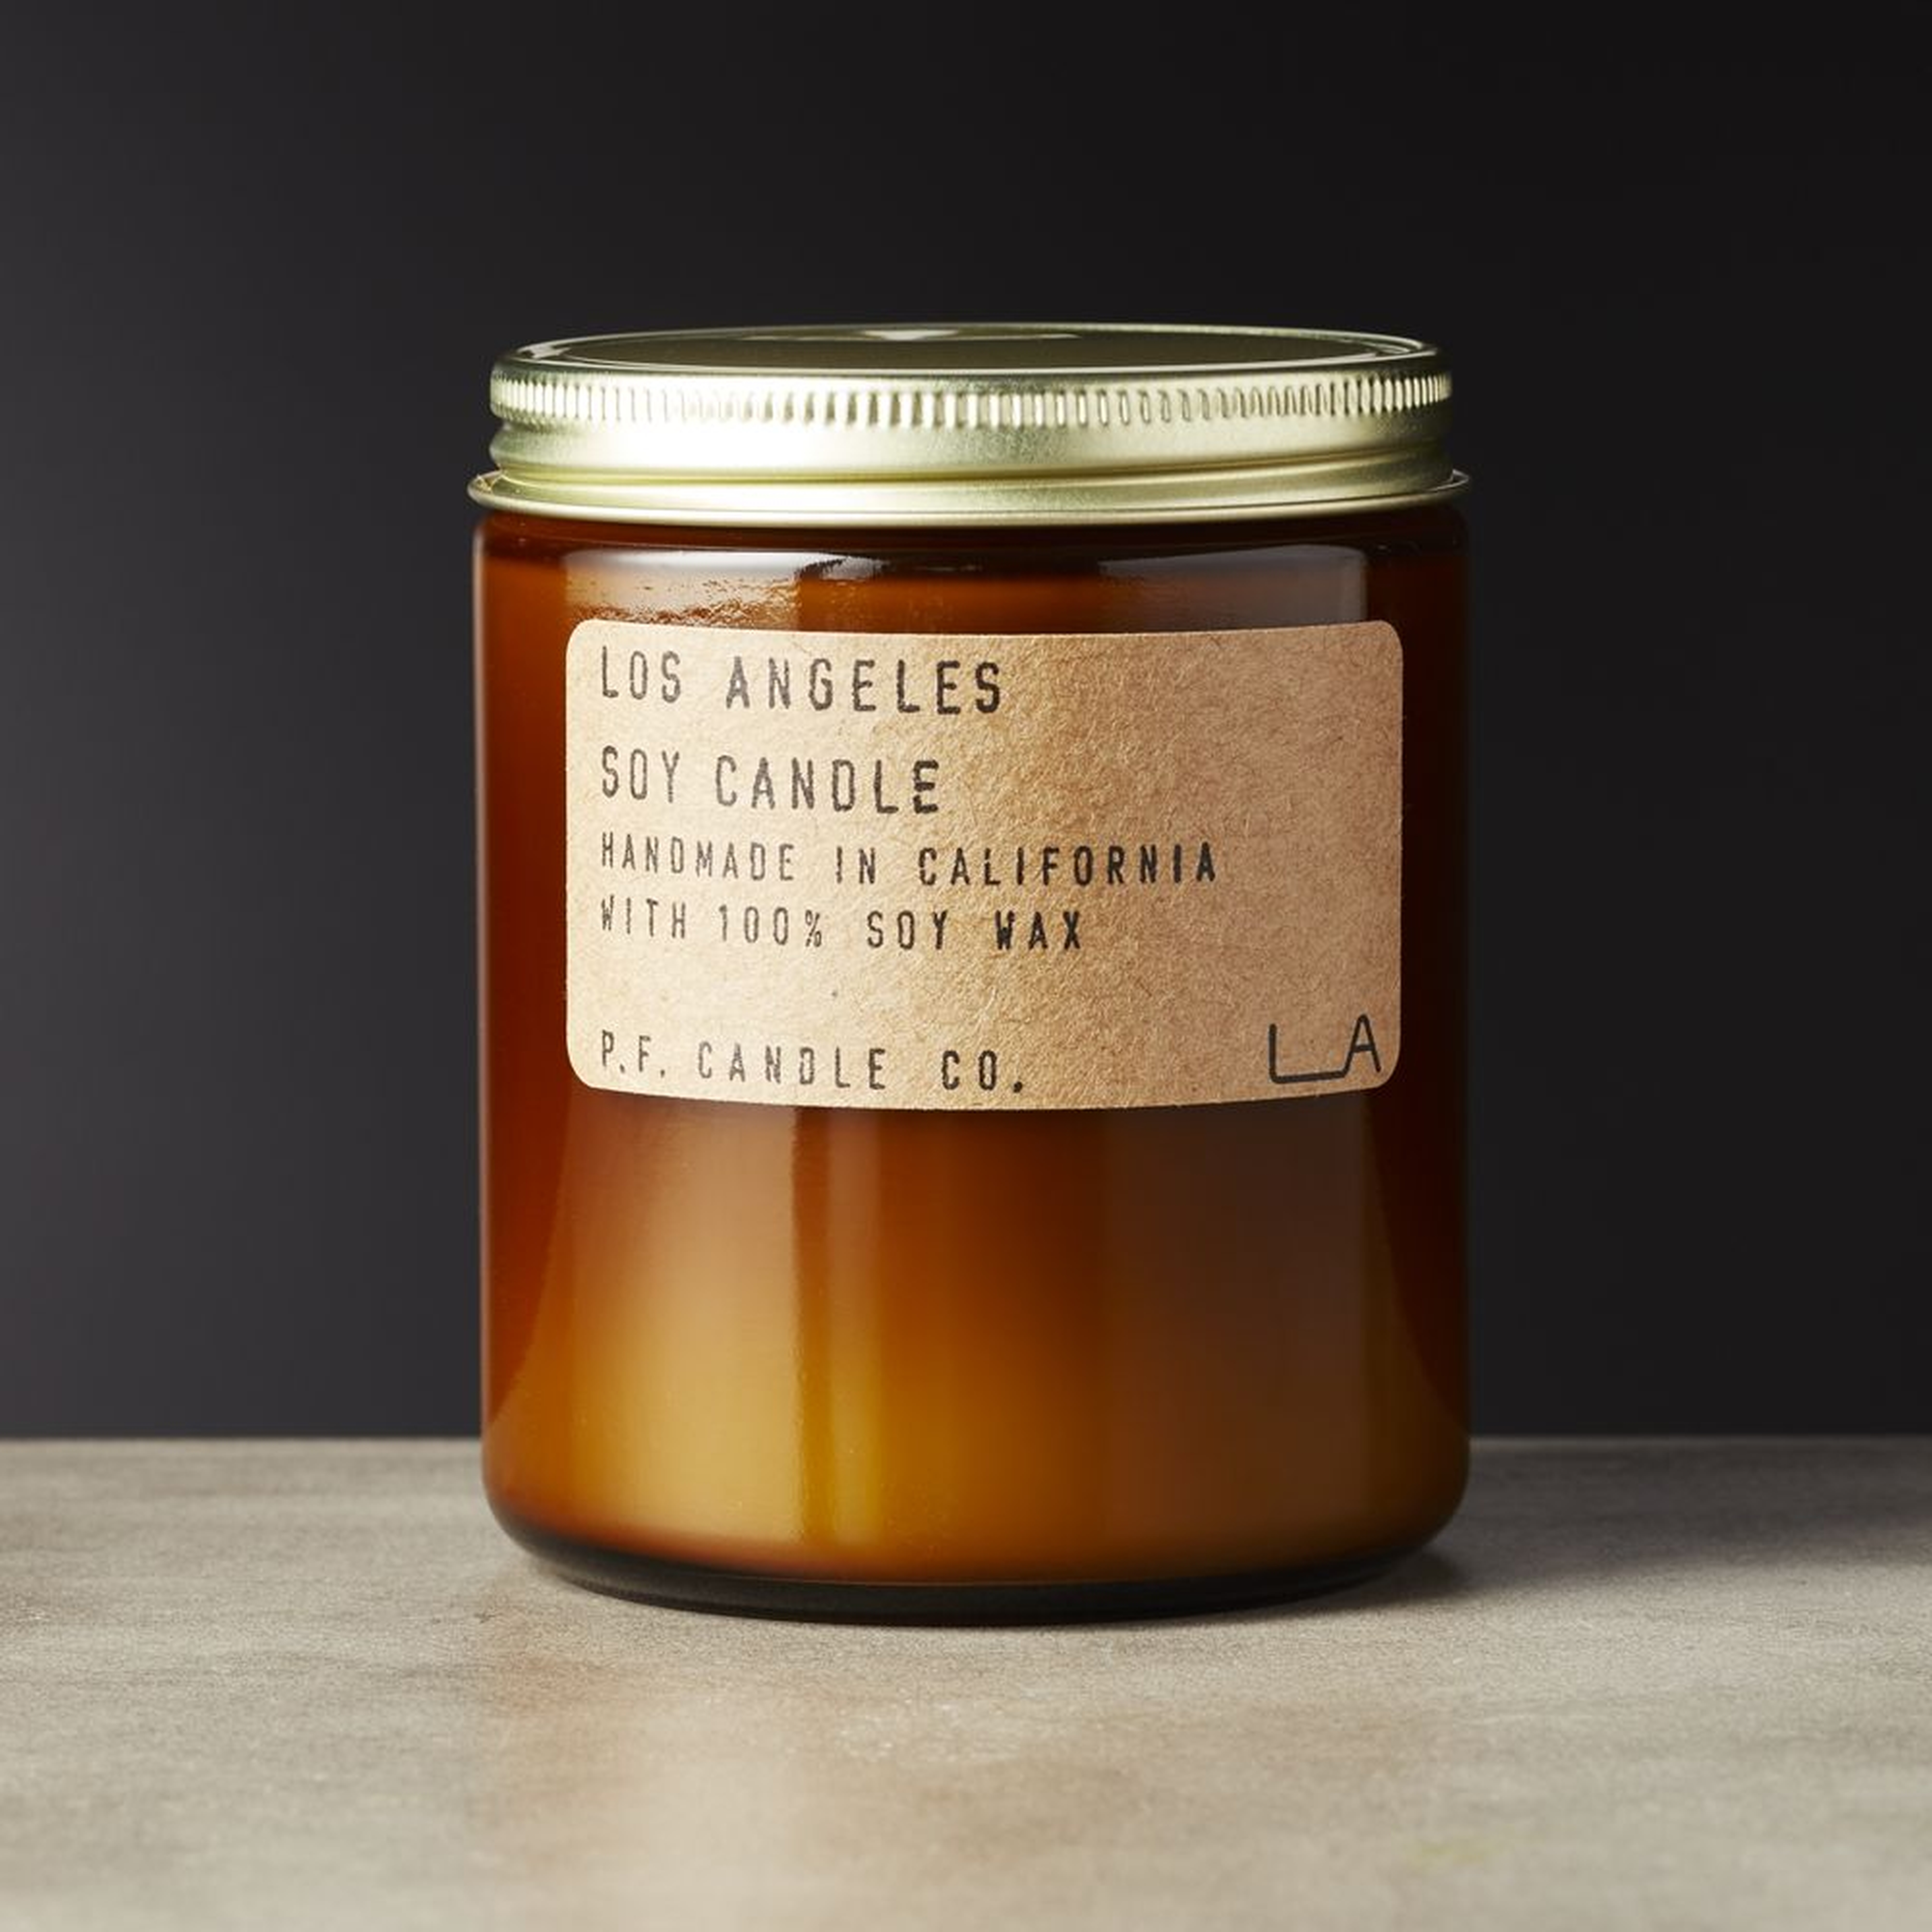 Los Angeles Soy Candle 7.2 oz - CB2